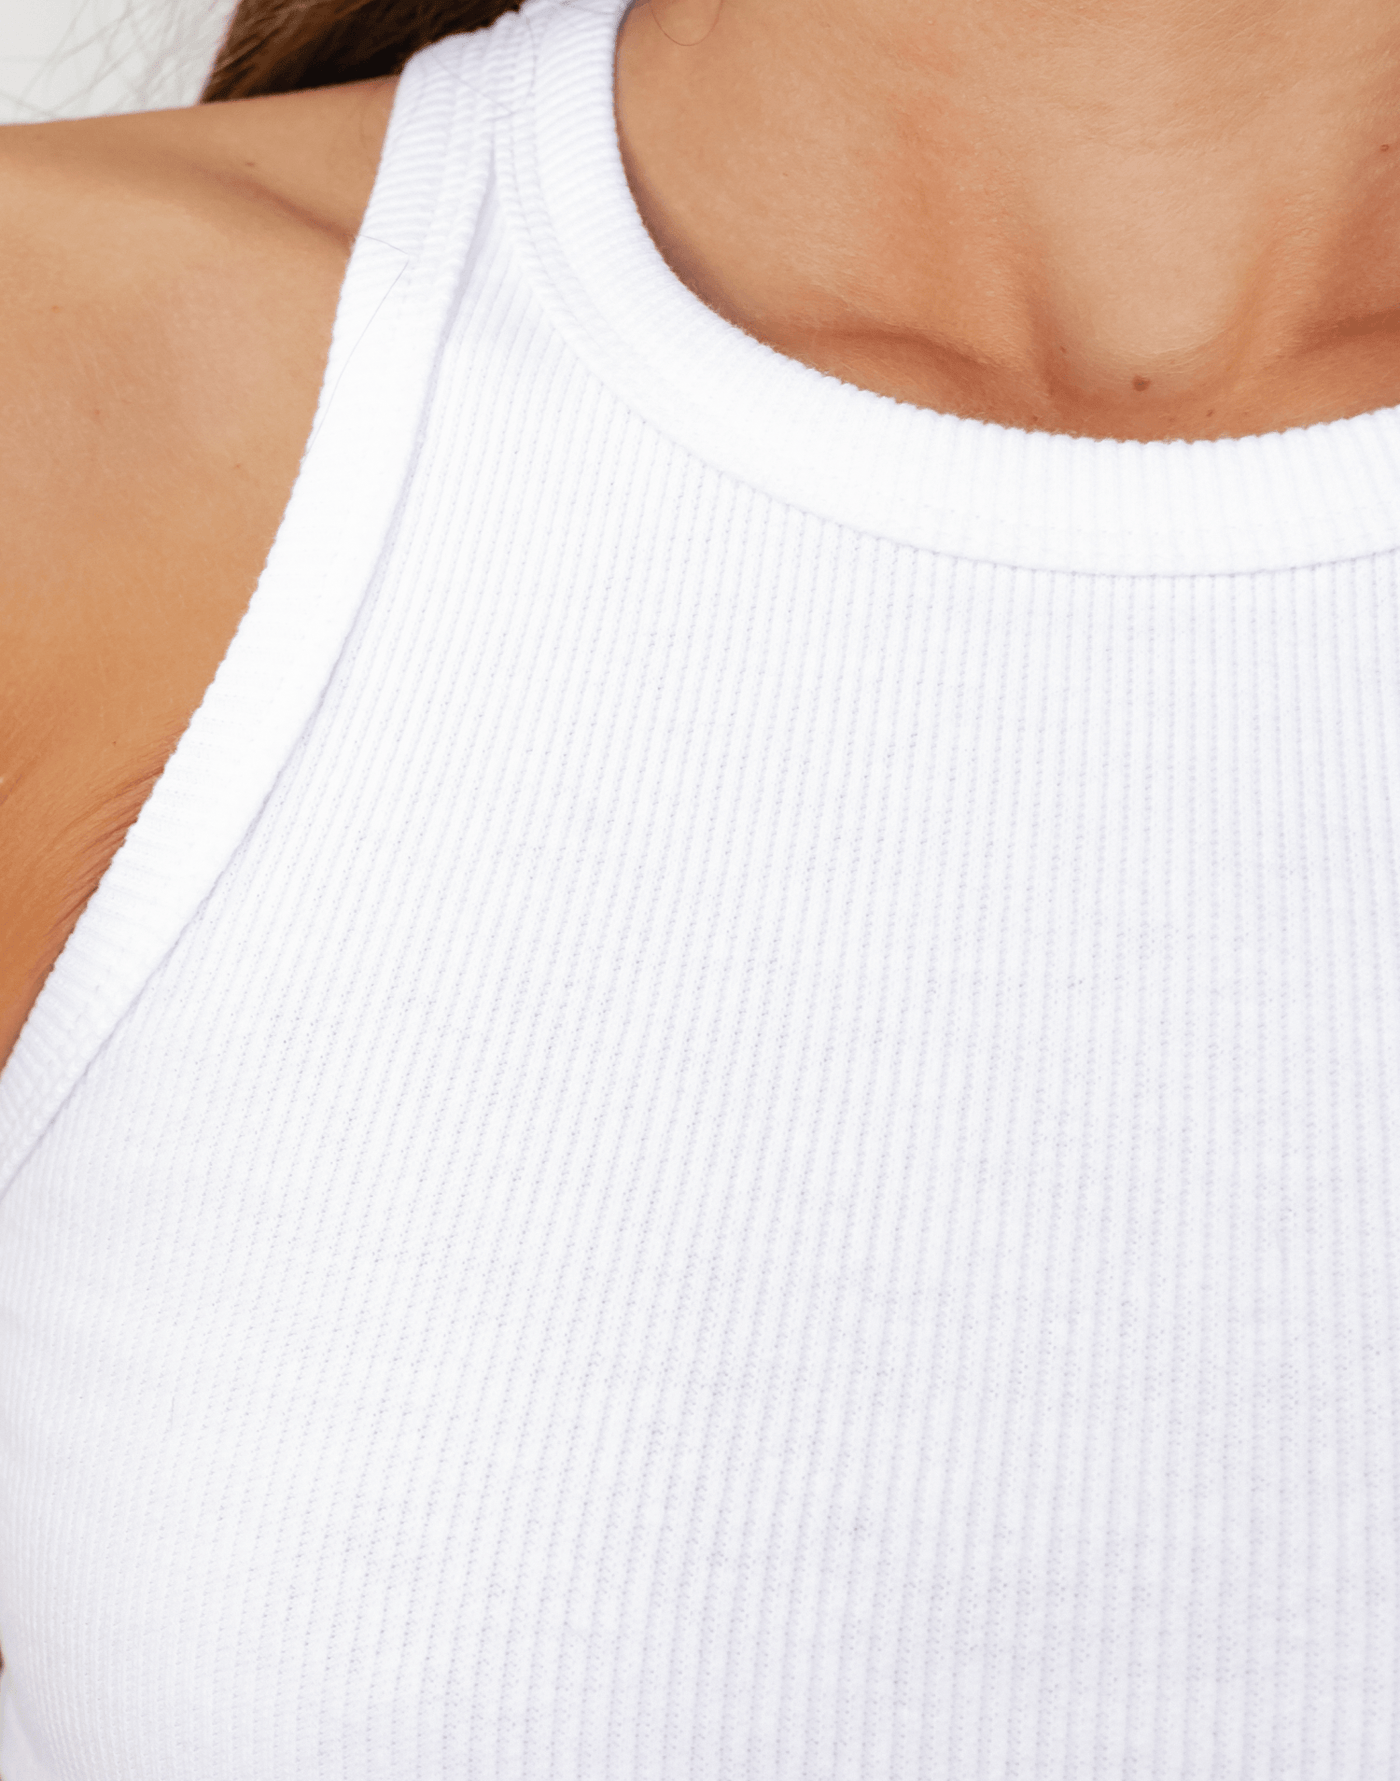 Emerie Tank Top (White) - Ribbed Tank Top - Women's Top - Charcoal Clothing